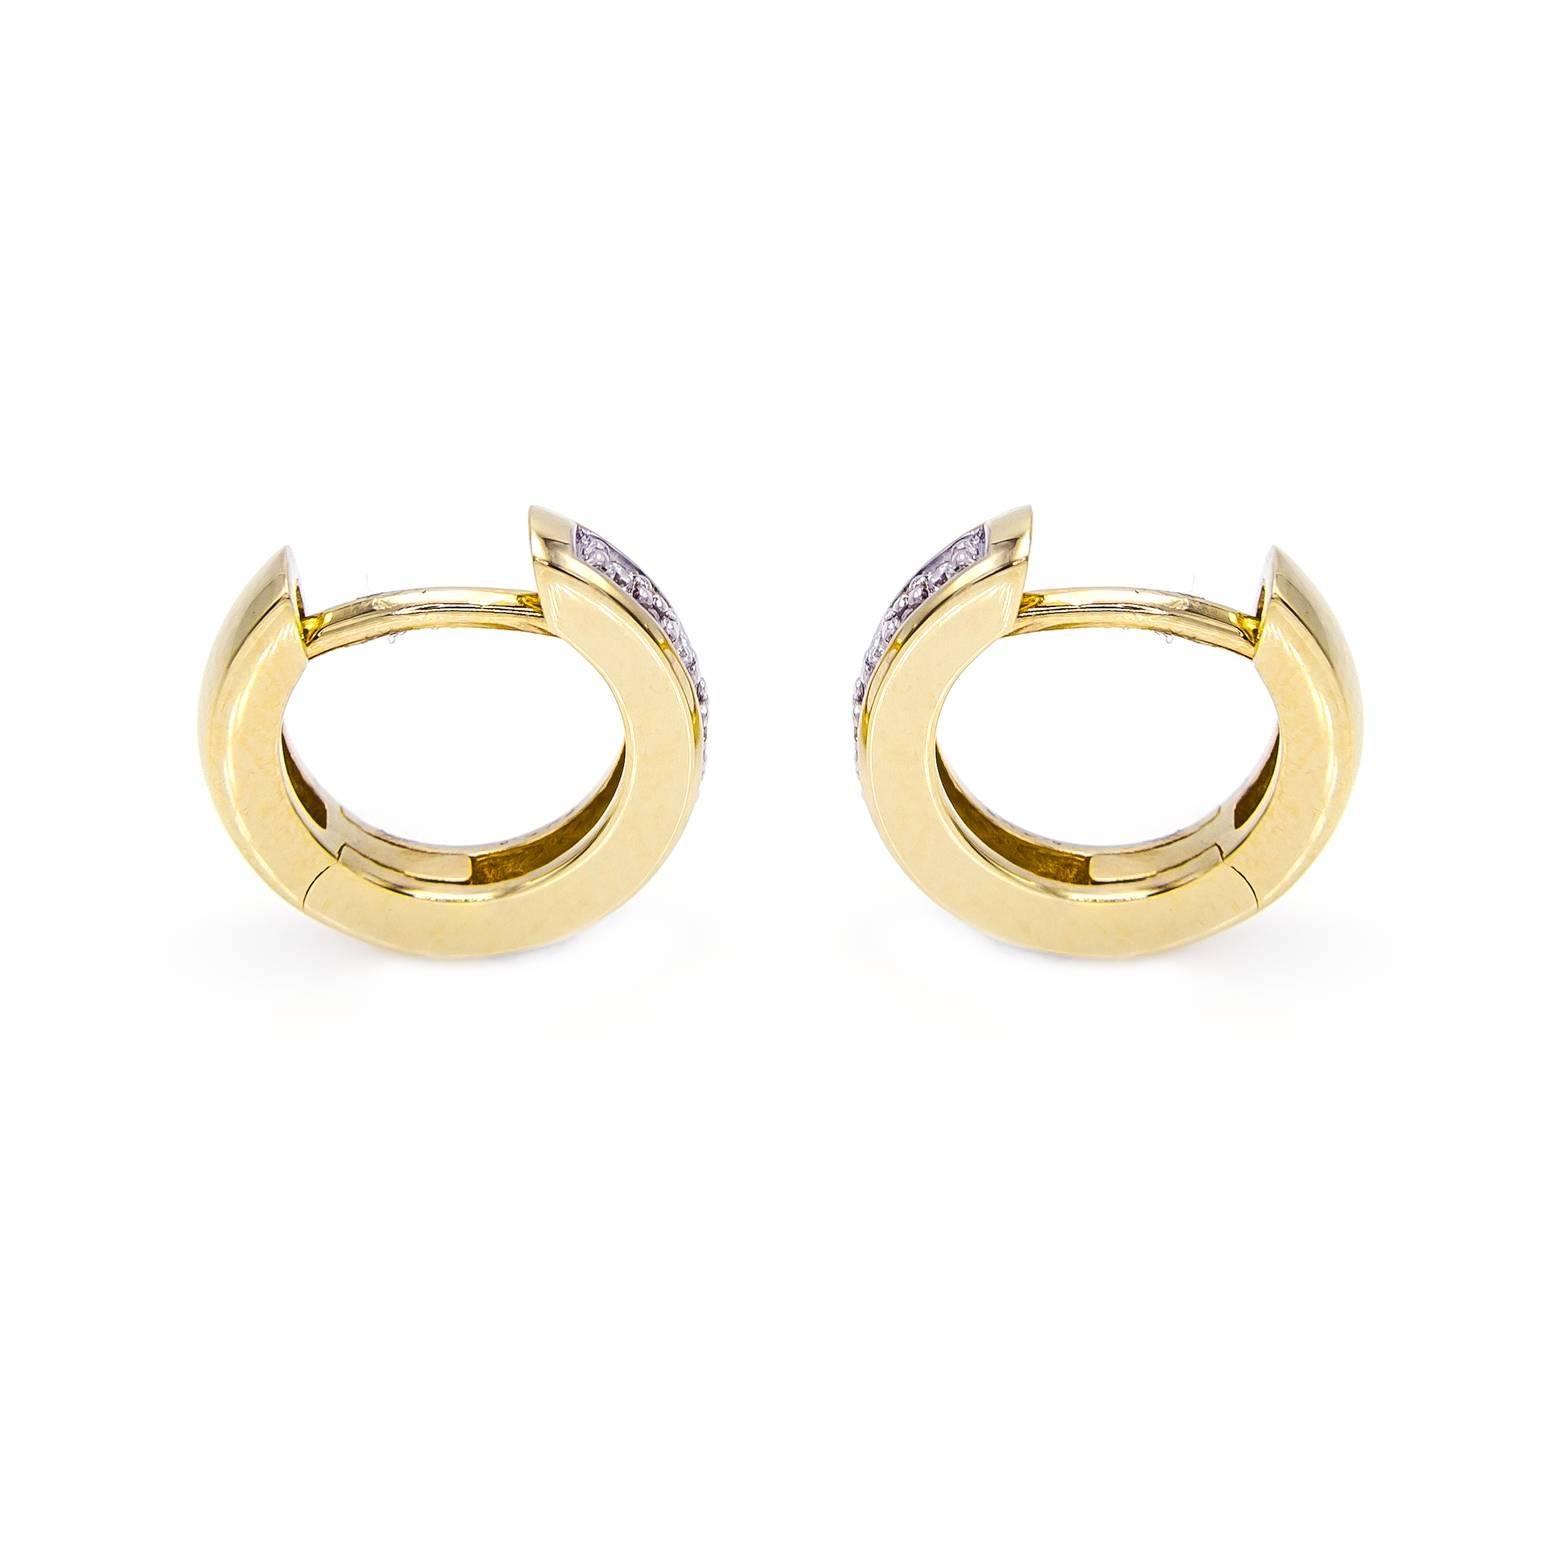 These lustrous yellow gold and diamond huggie hoops are dressed up with 5 diamonds on each earring. They fit comfortably, click into place and can easily be dressed up or down. Fashionable and glamorous! The total weight of the diamond are 0.06